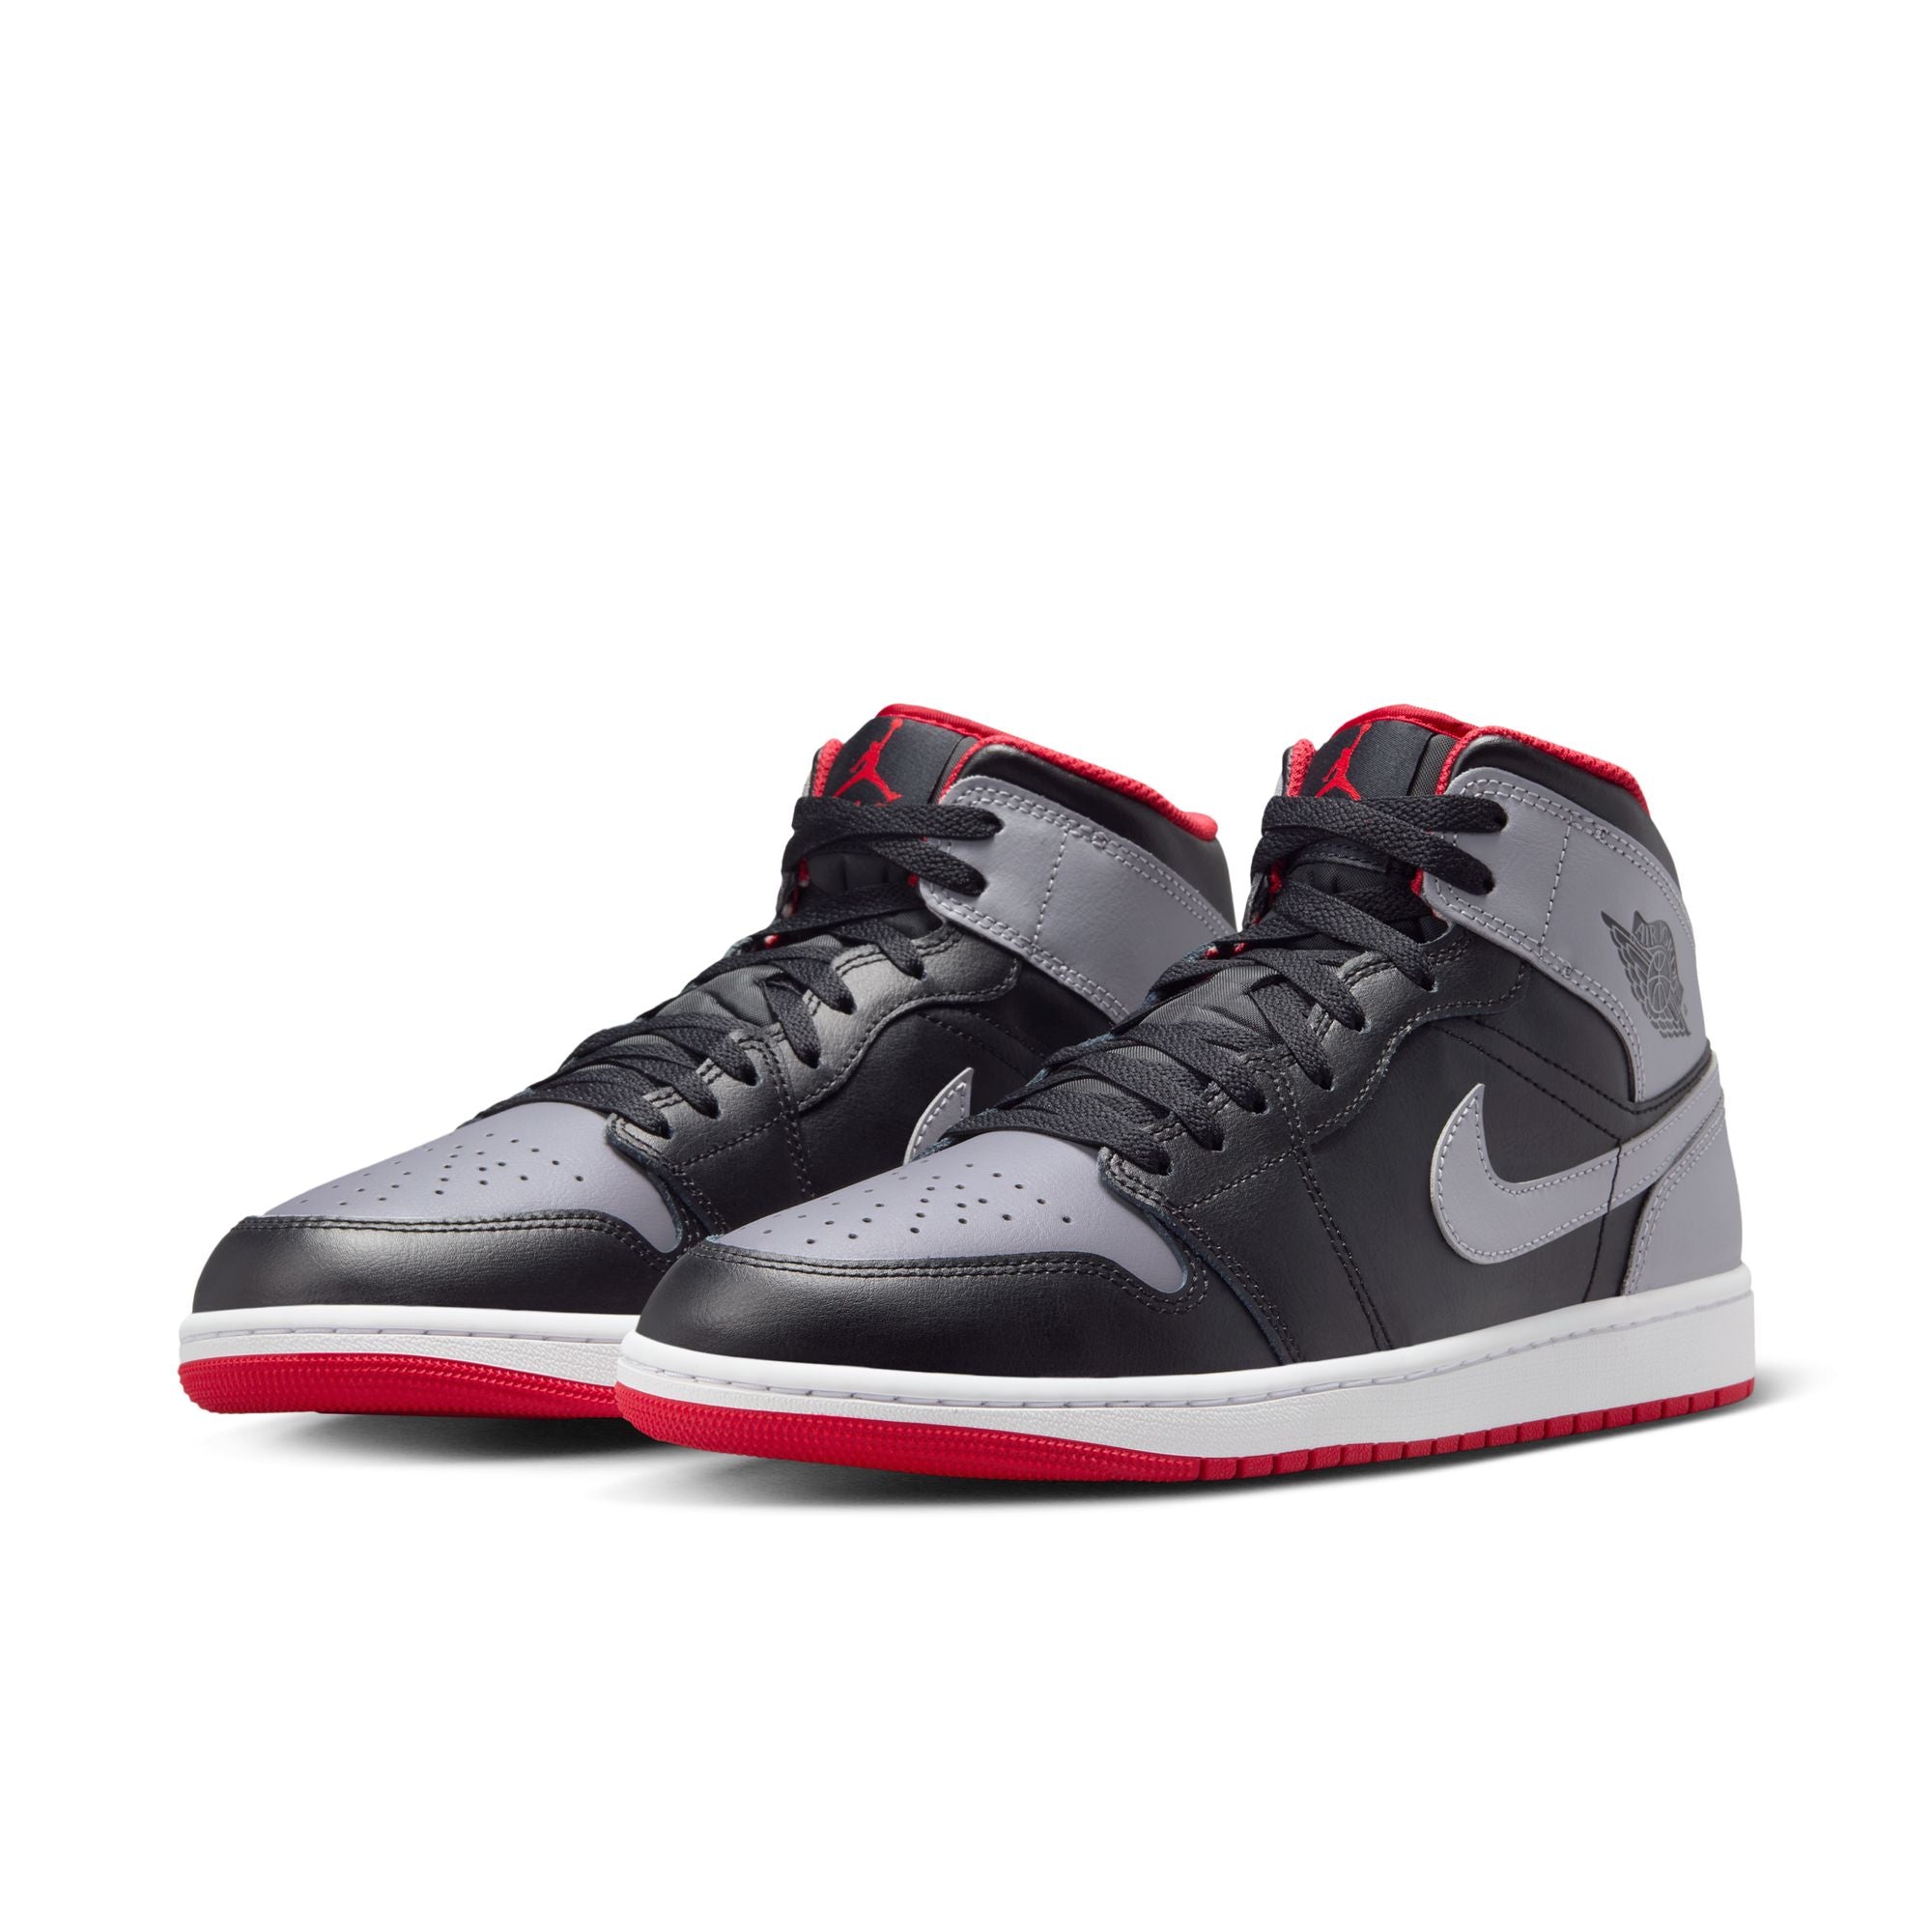 NIKE - Air Jordan 1 Mid - (Black/Cement Grey-Fire Red-Whi) view 5